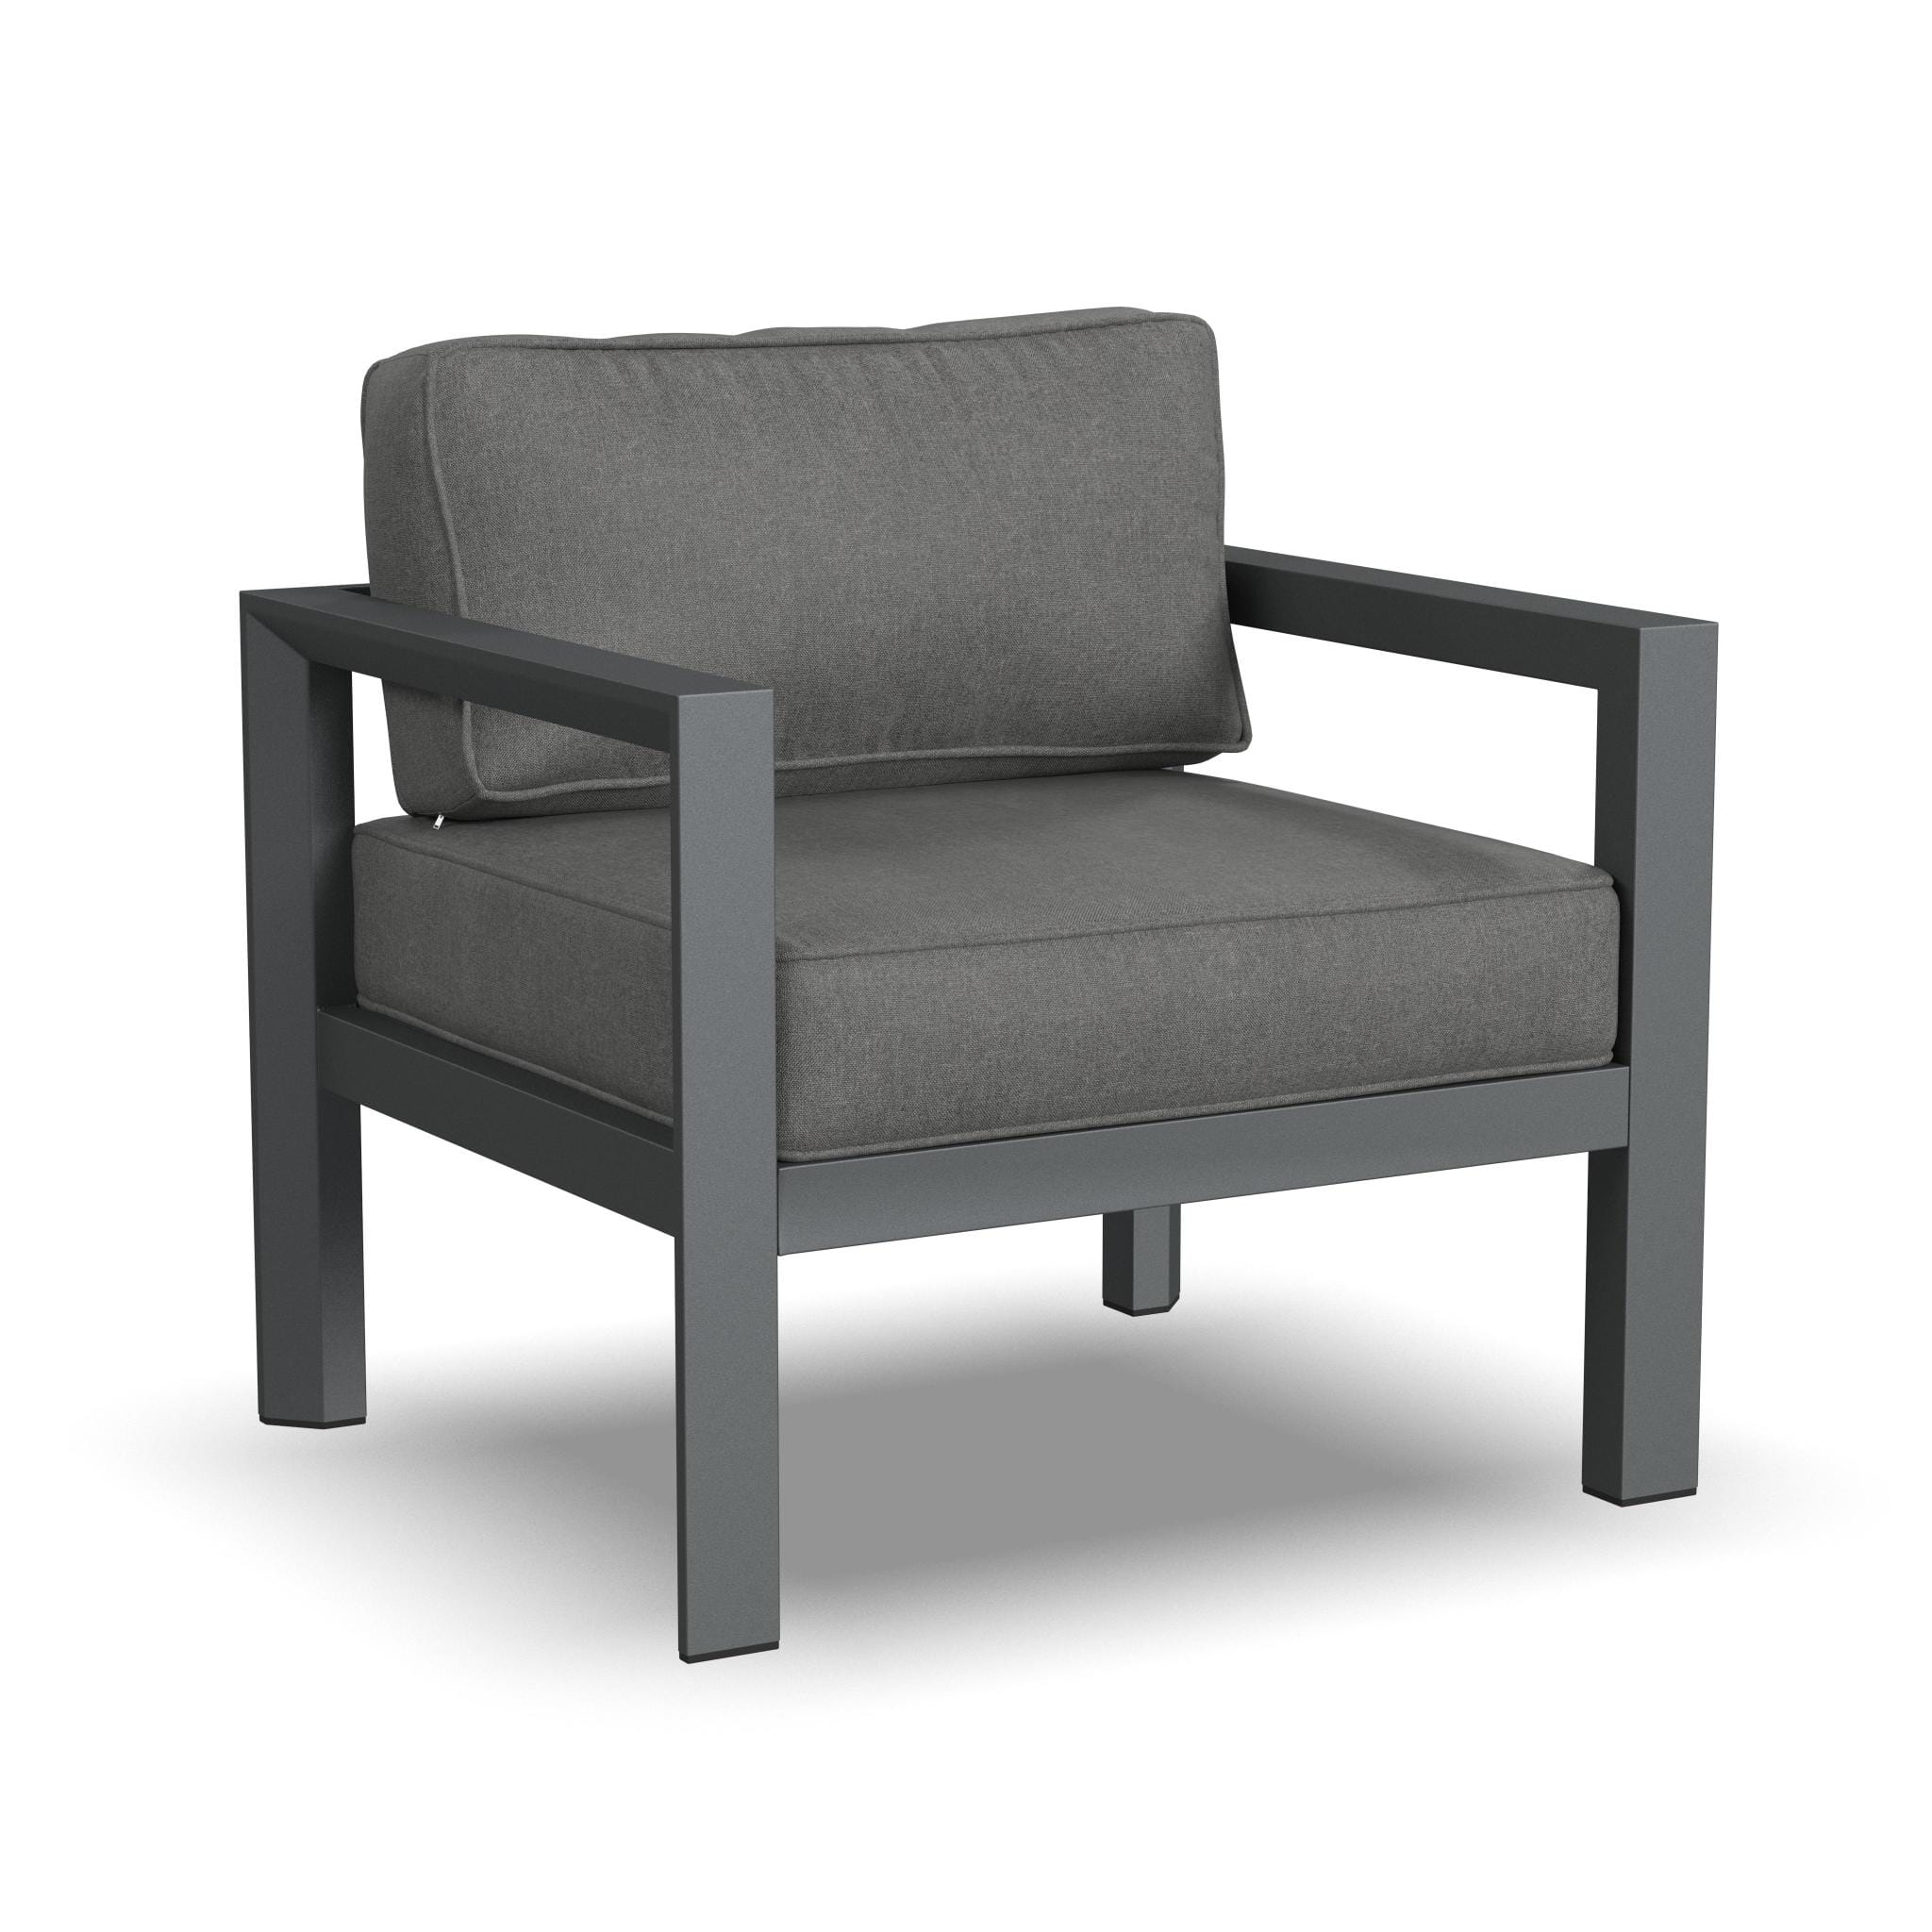 Modern & Contemporary Outdoor Aluminum Lounge Chair By Grayton Outdoor Seating Grayton